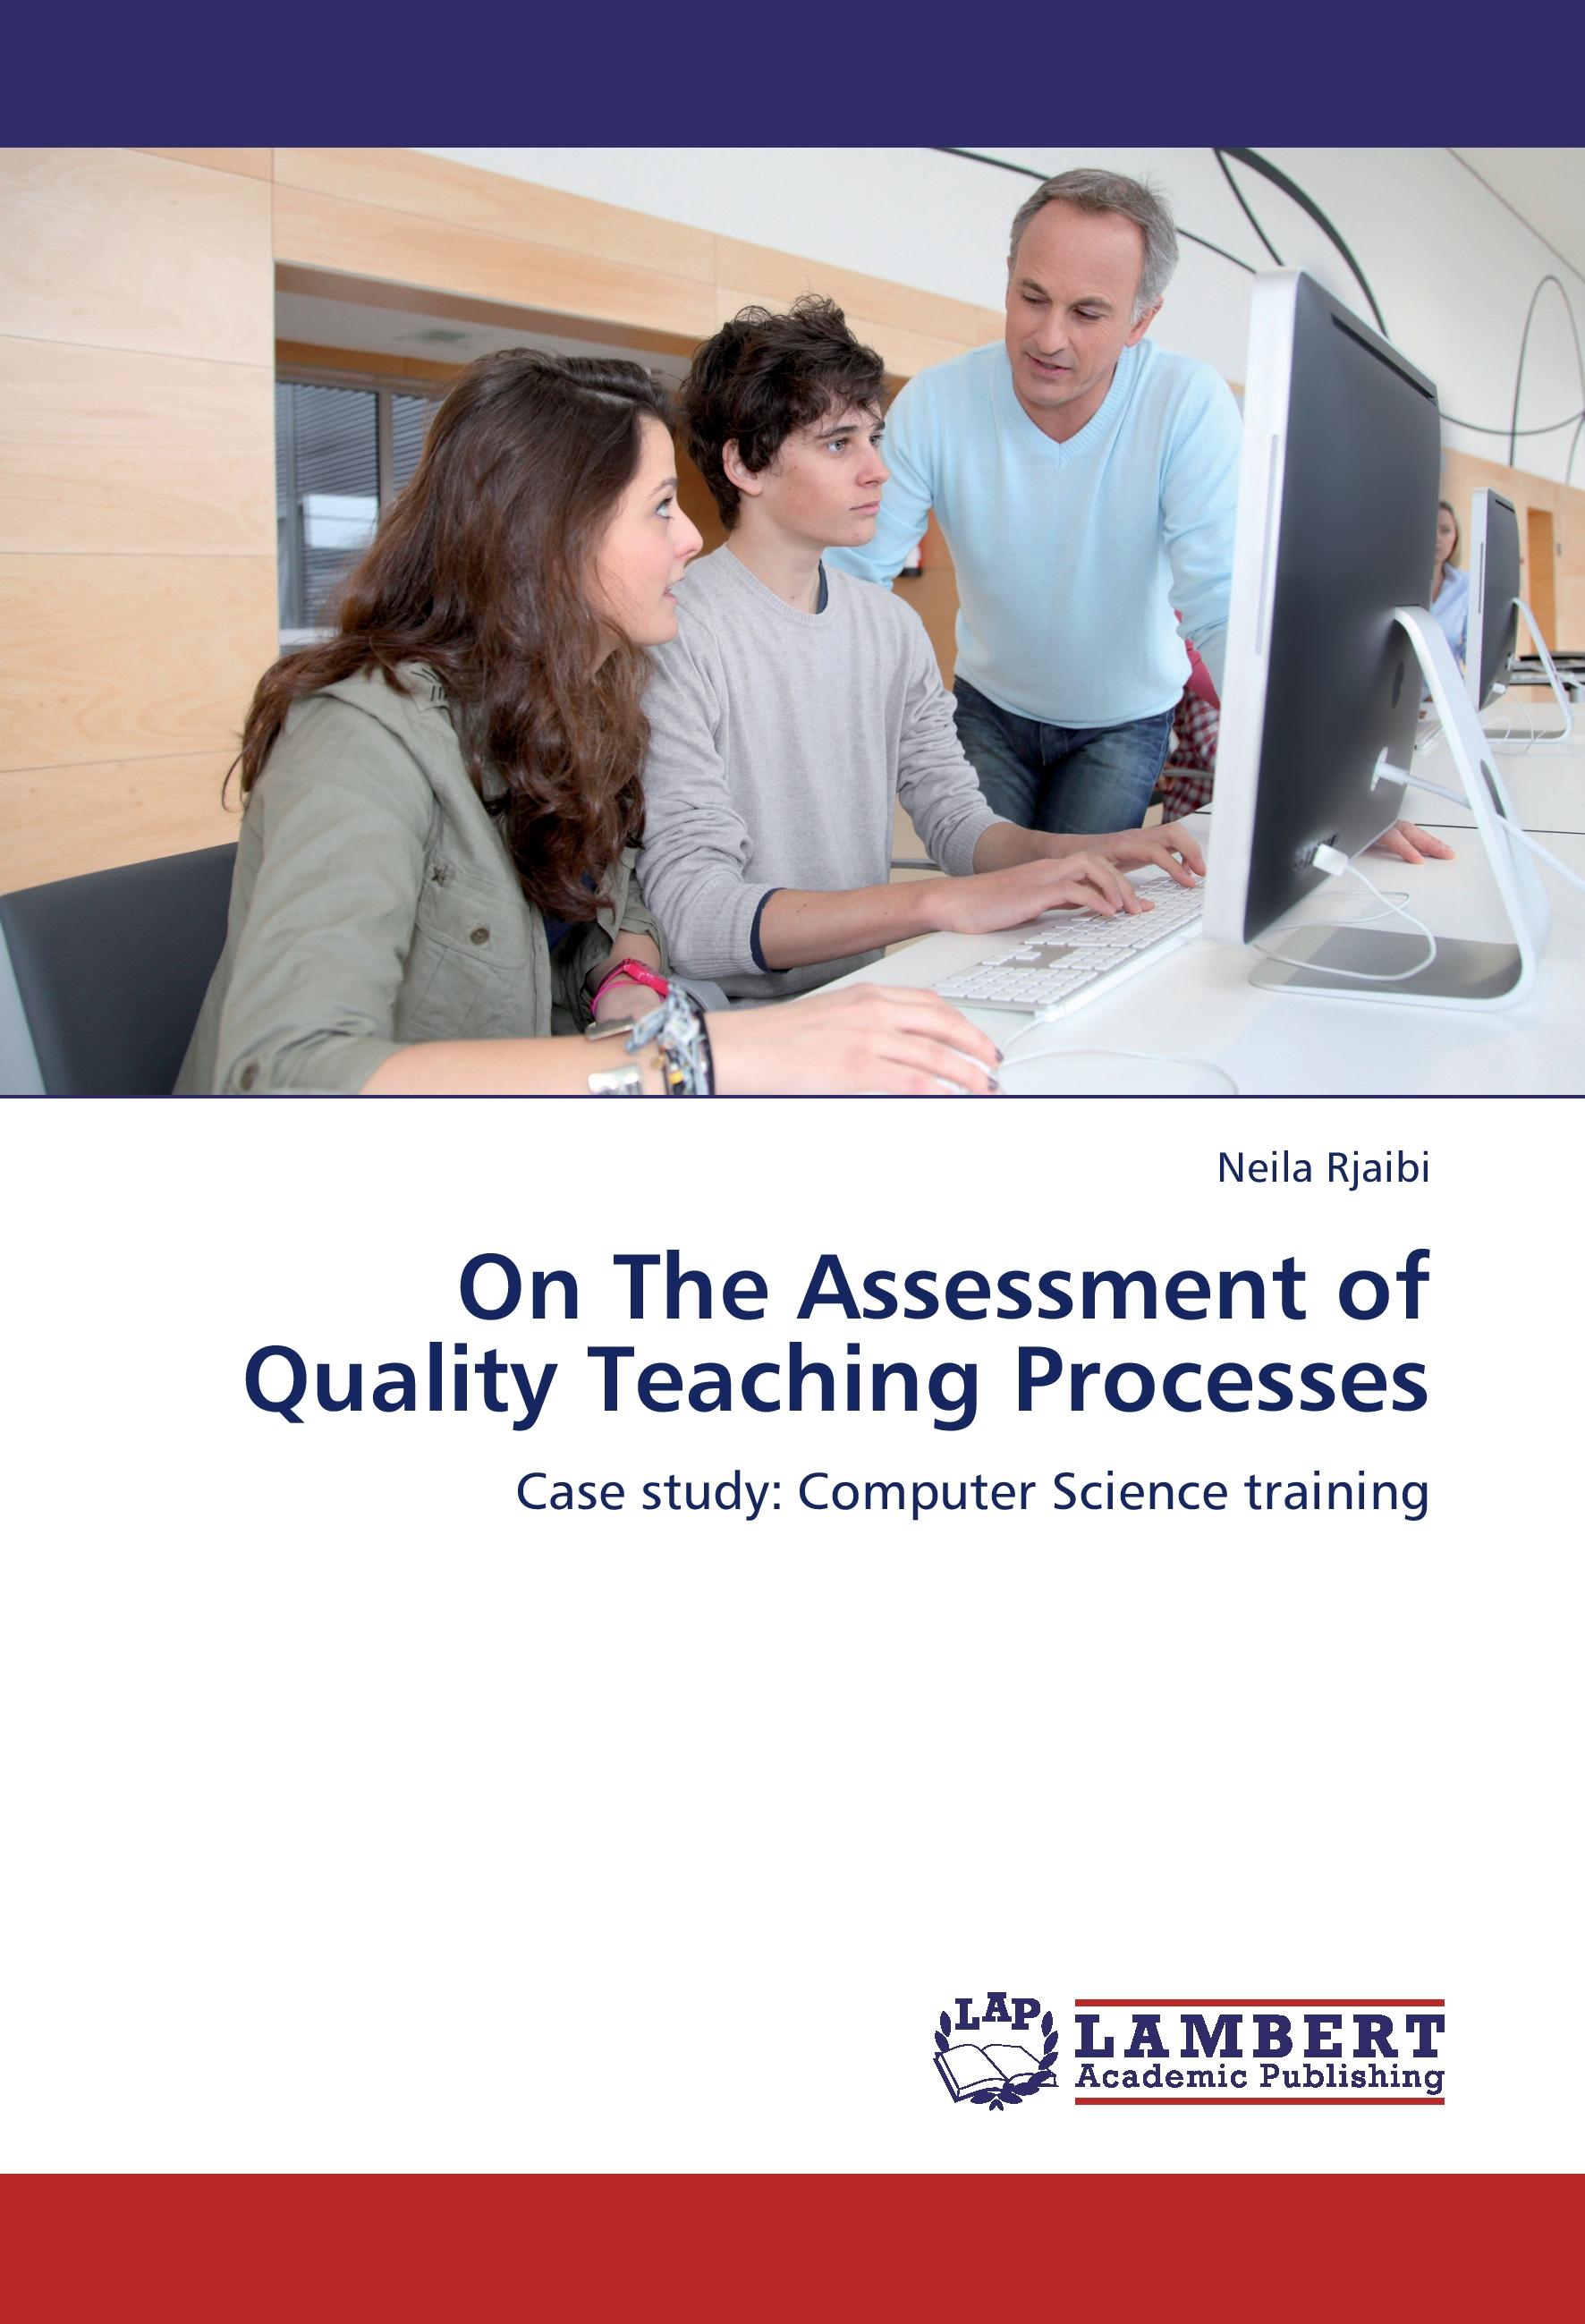 On The Assessment of Quality Teaching Processes - Neila Rjaibi